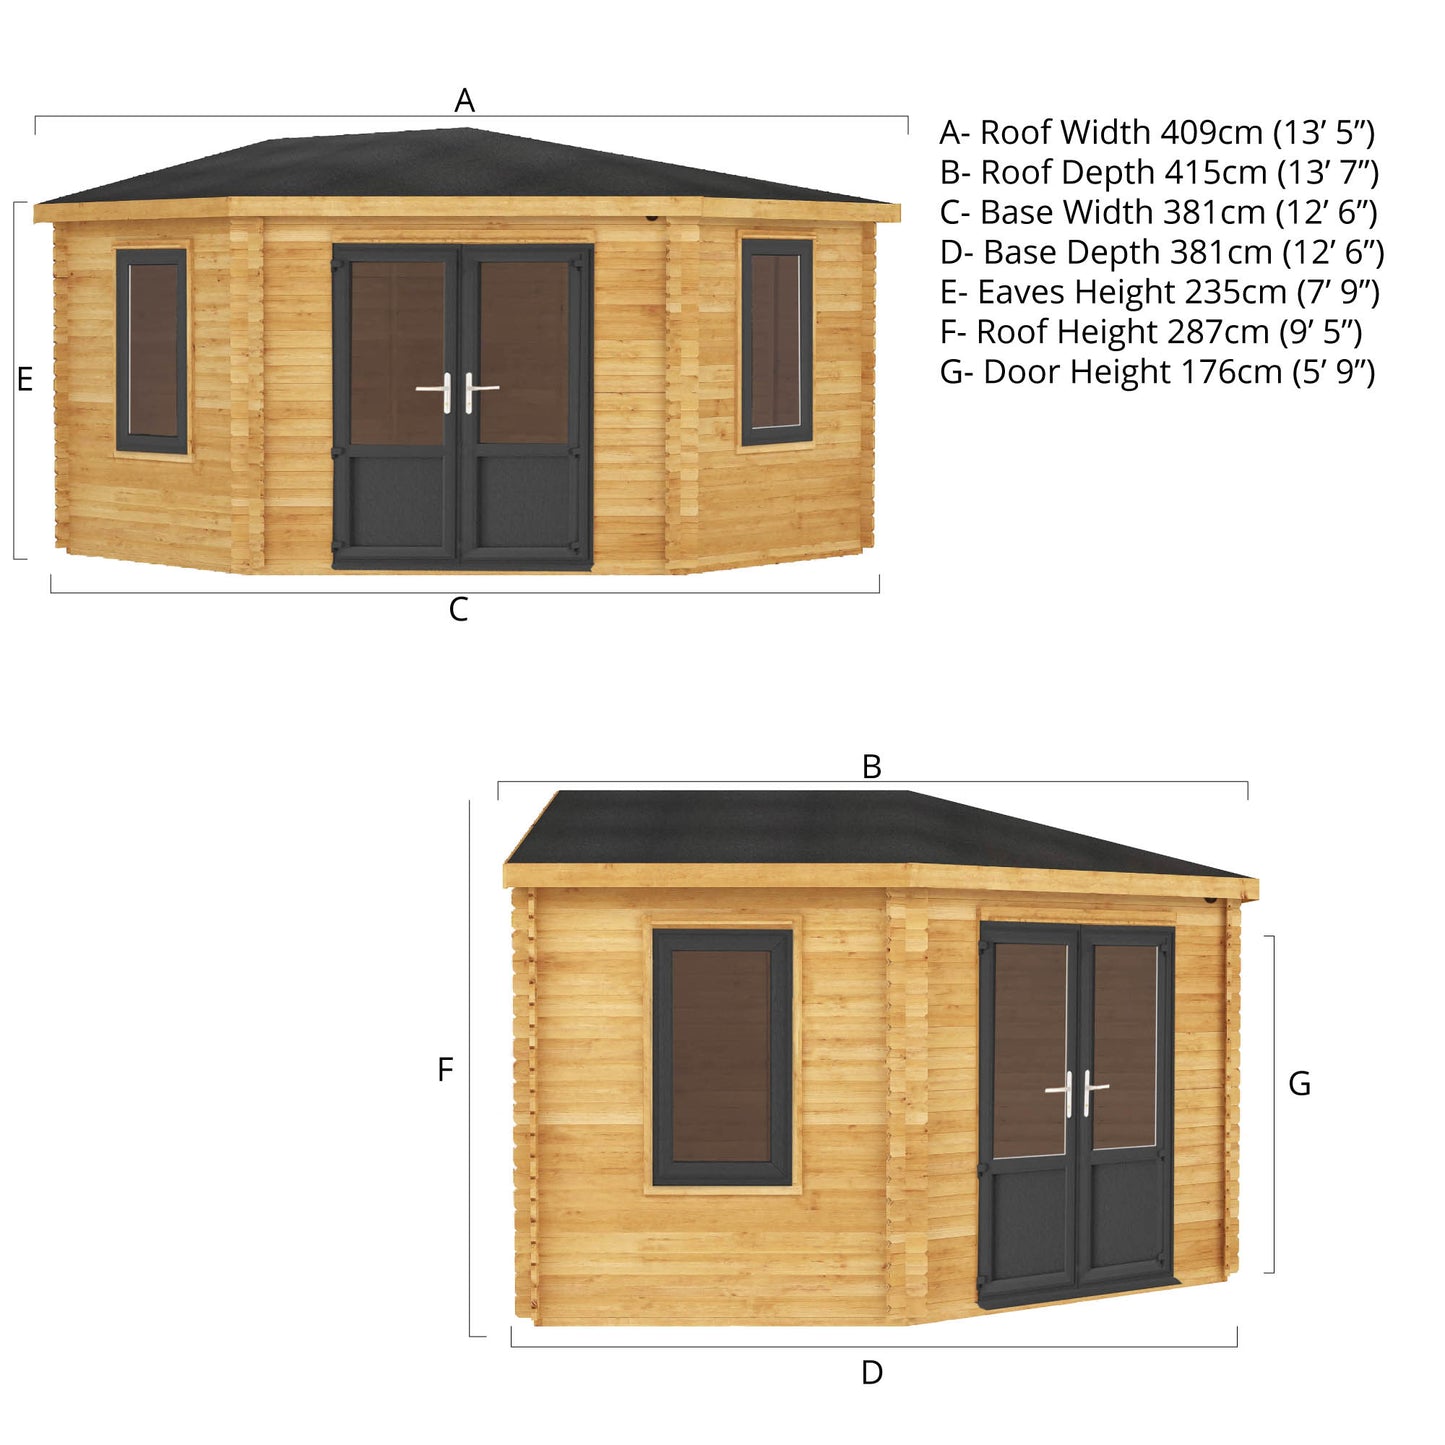 The 4m x 4m Goldcrest Corner Log Cabin with Anthracite UPVC